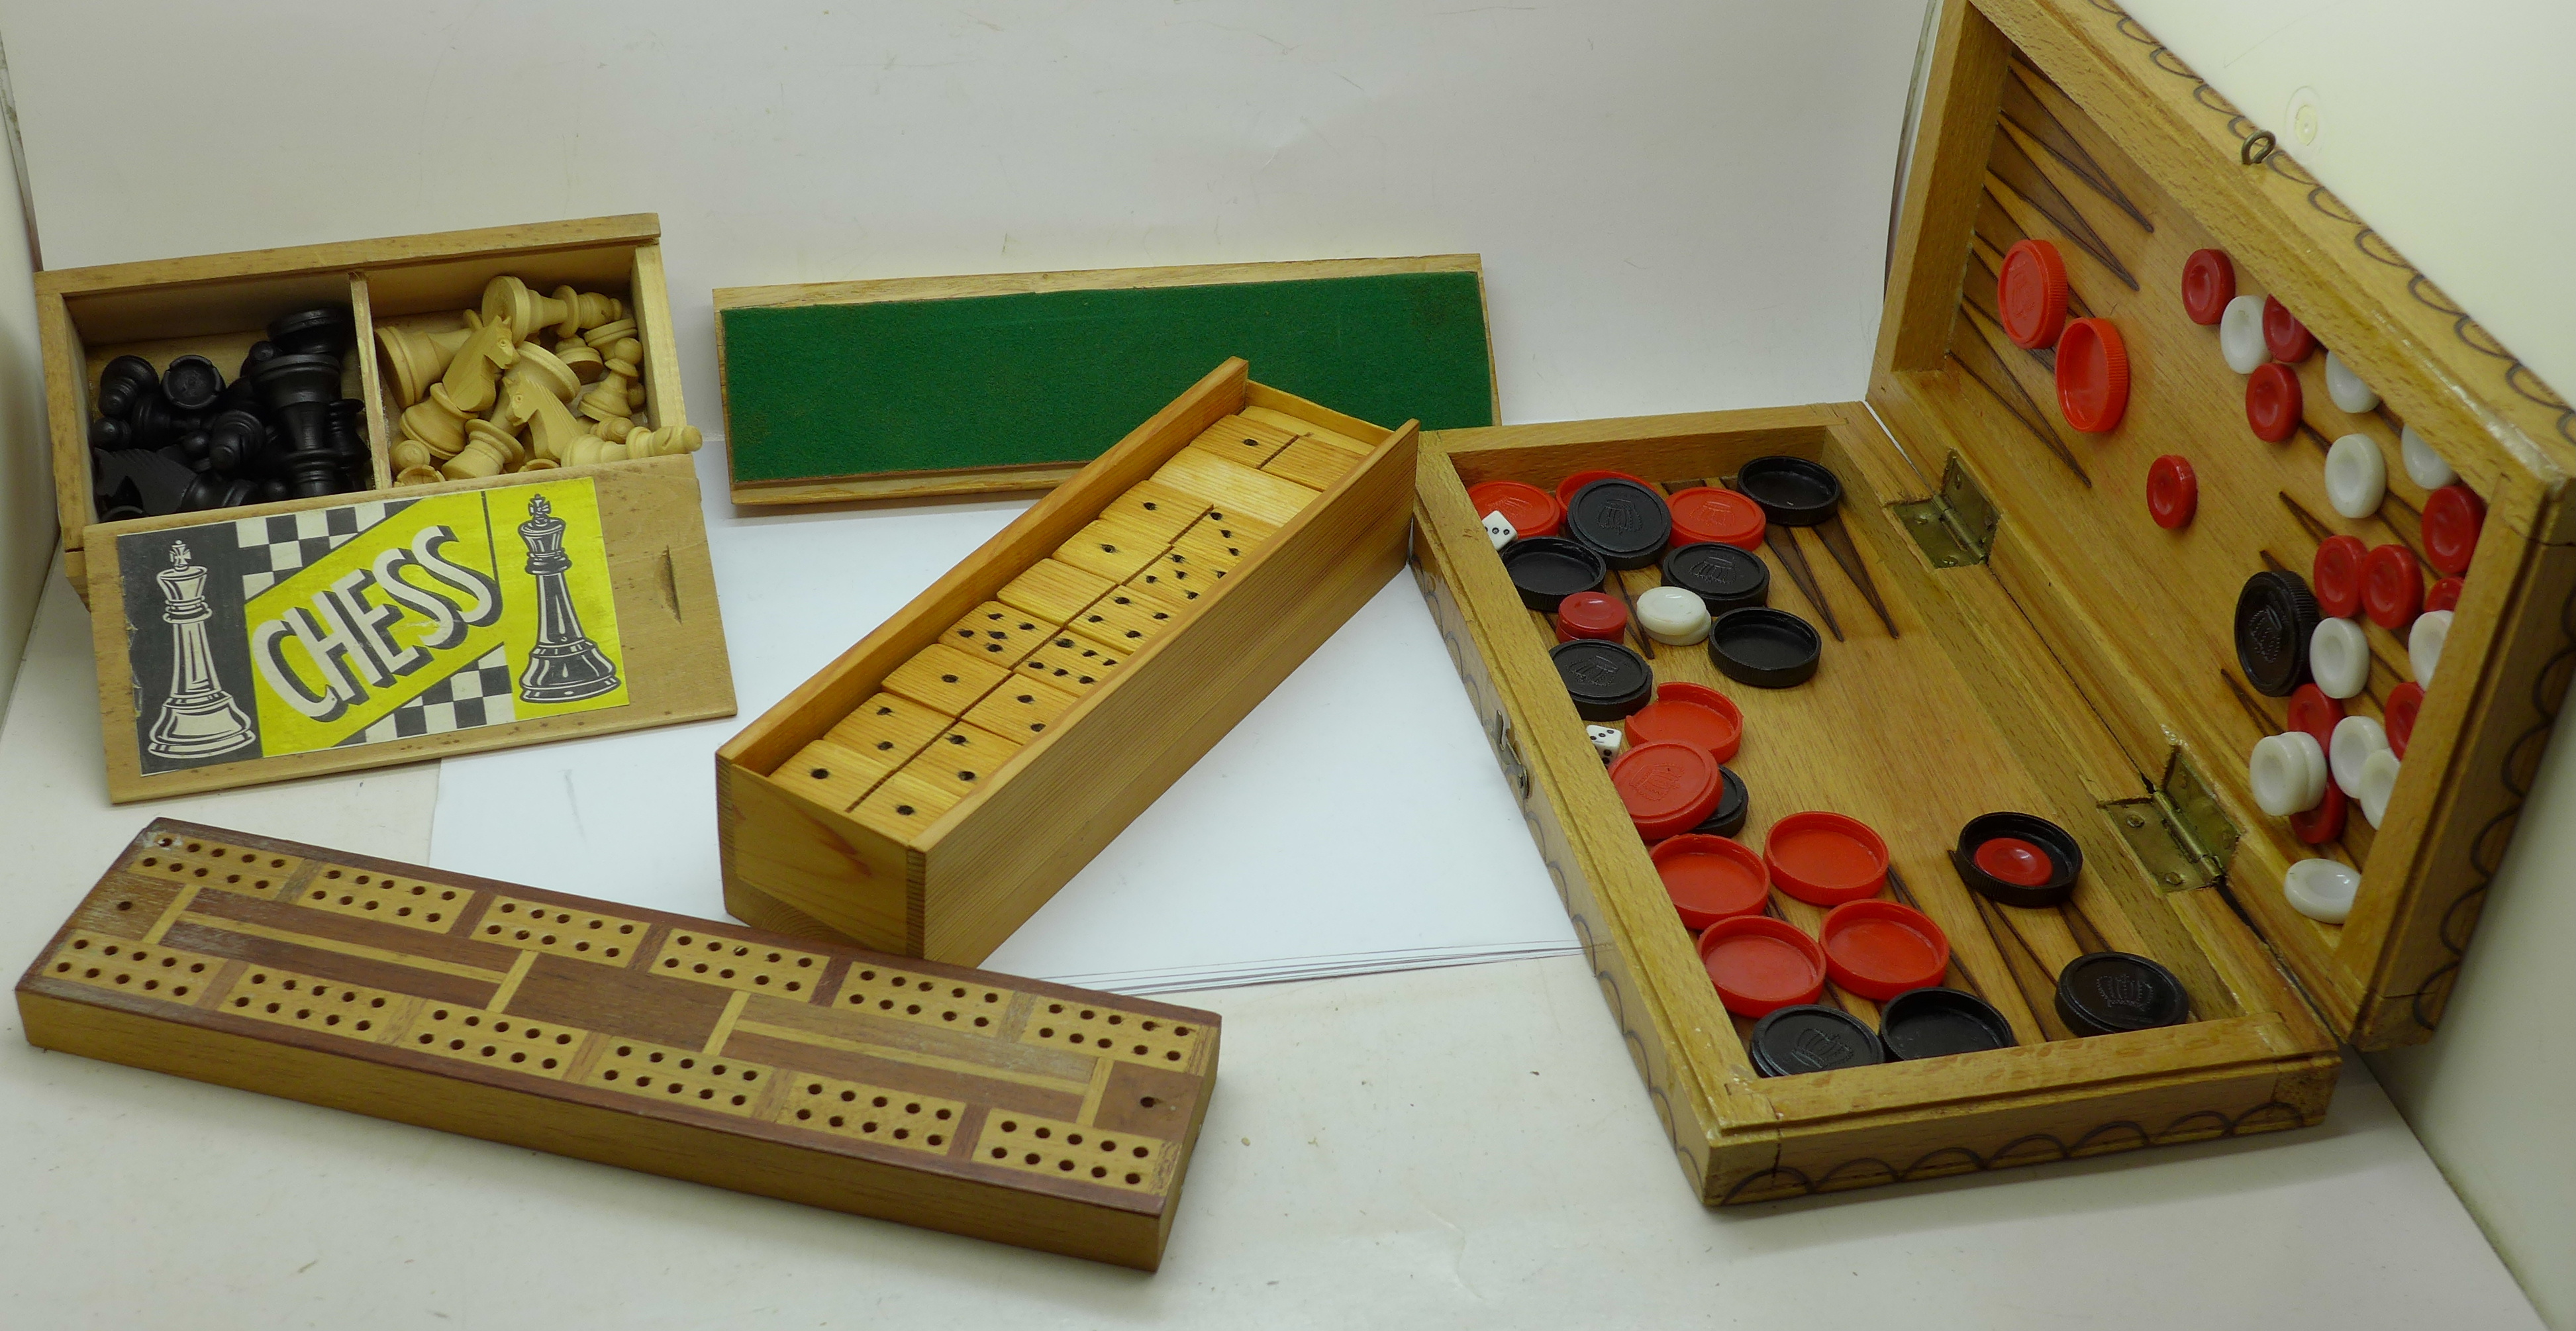 A collection of games including a chess set, cribbage board and dominoes